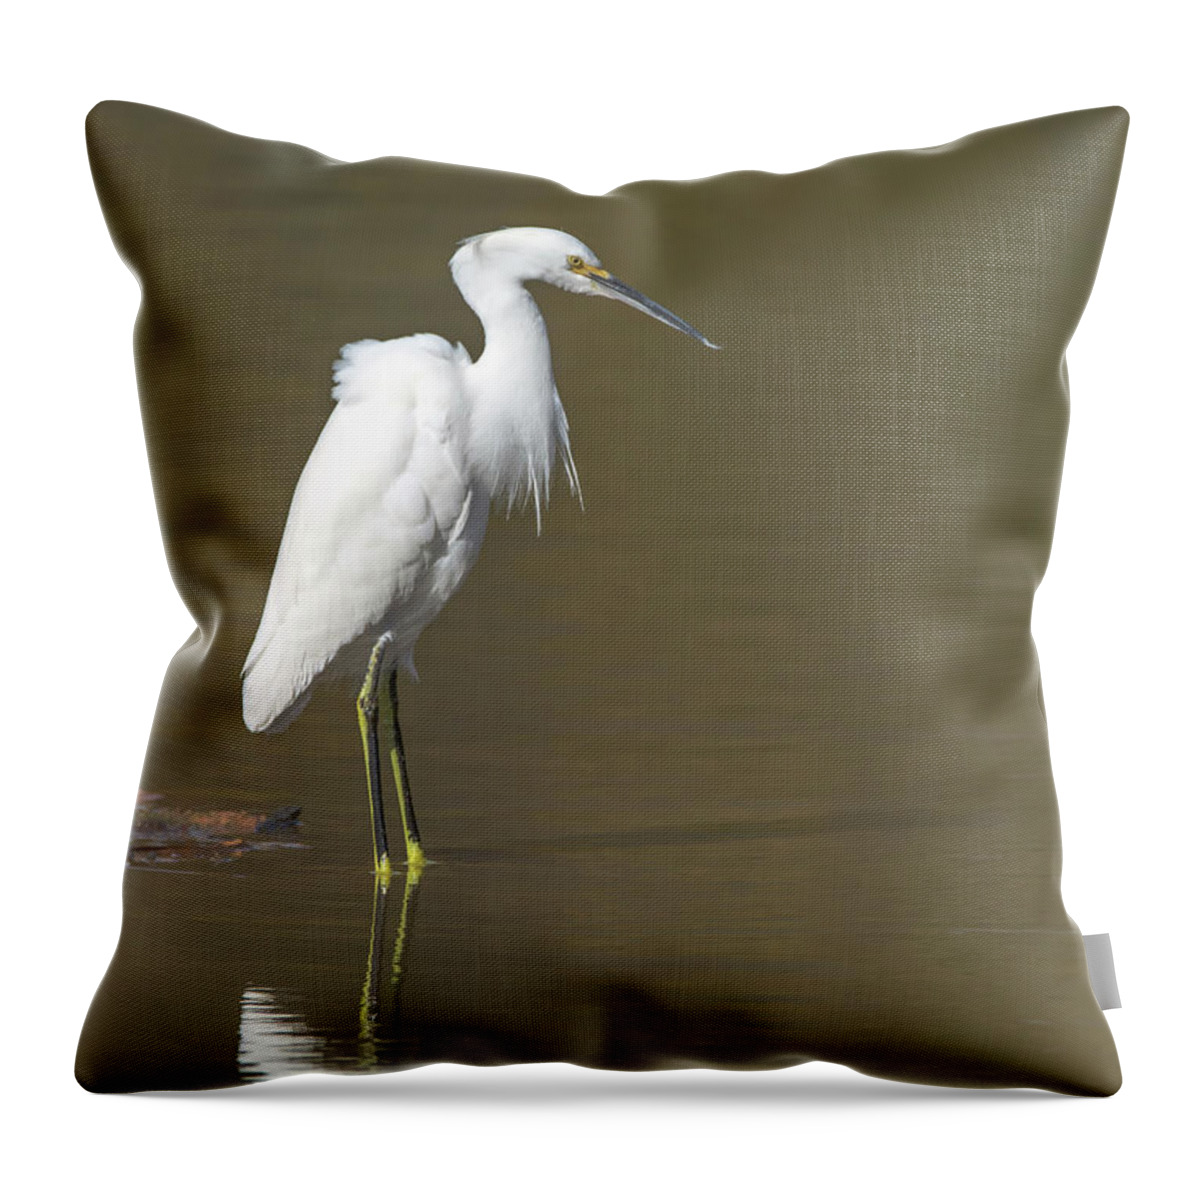 Snowy Throw Pillow featuring the photograph Snowy Egret #89 by Tam Ryan